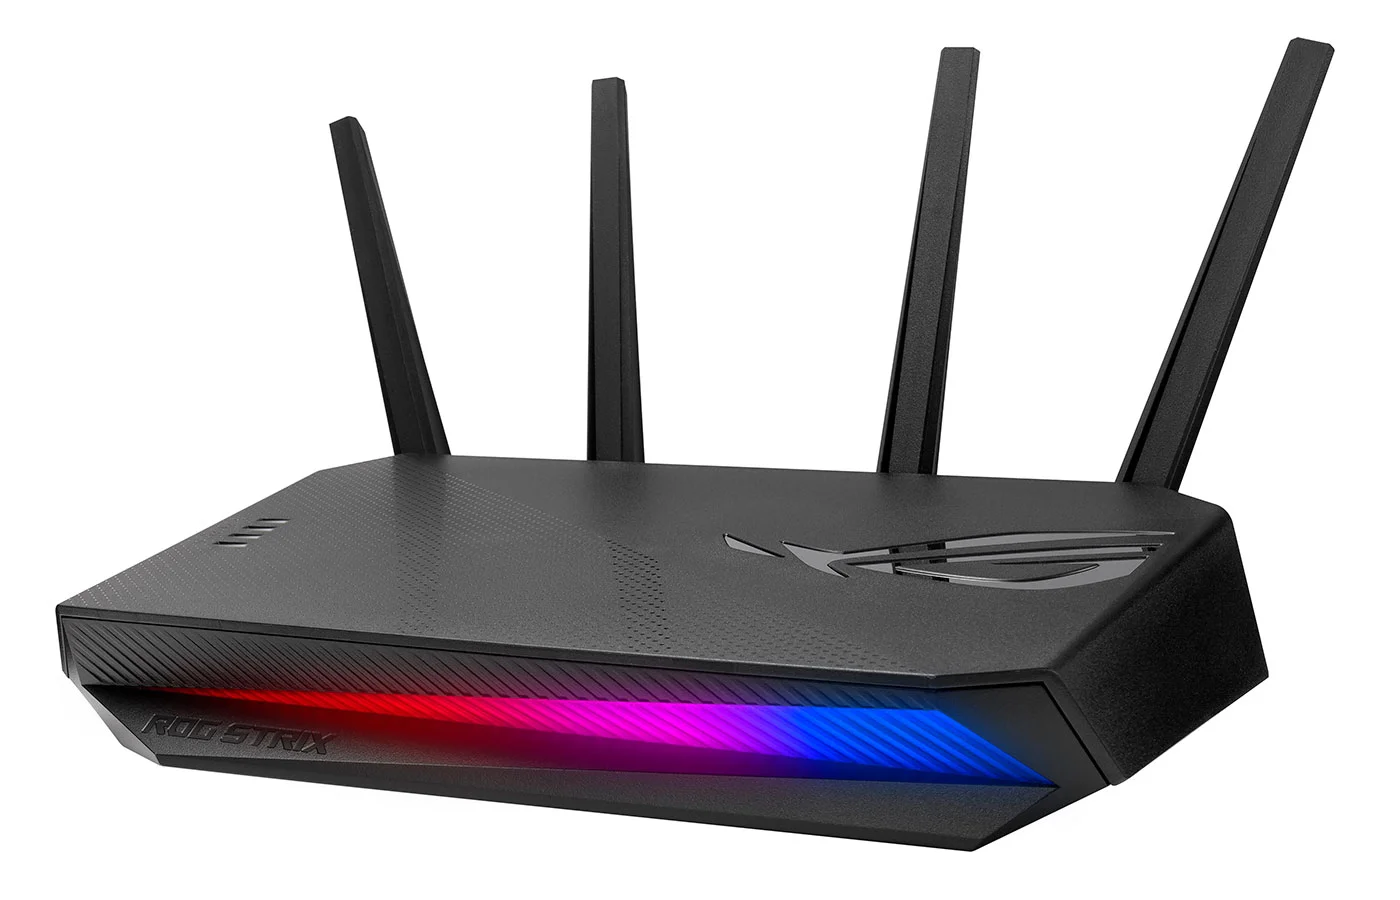 asus router with rgb lights